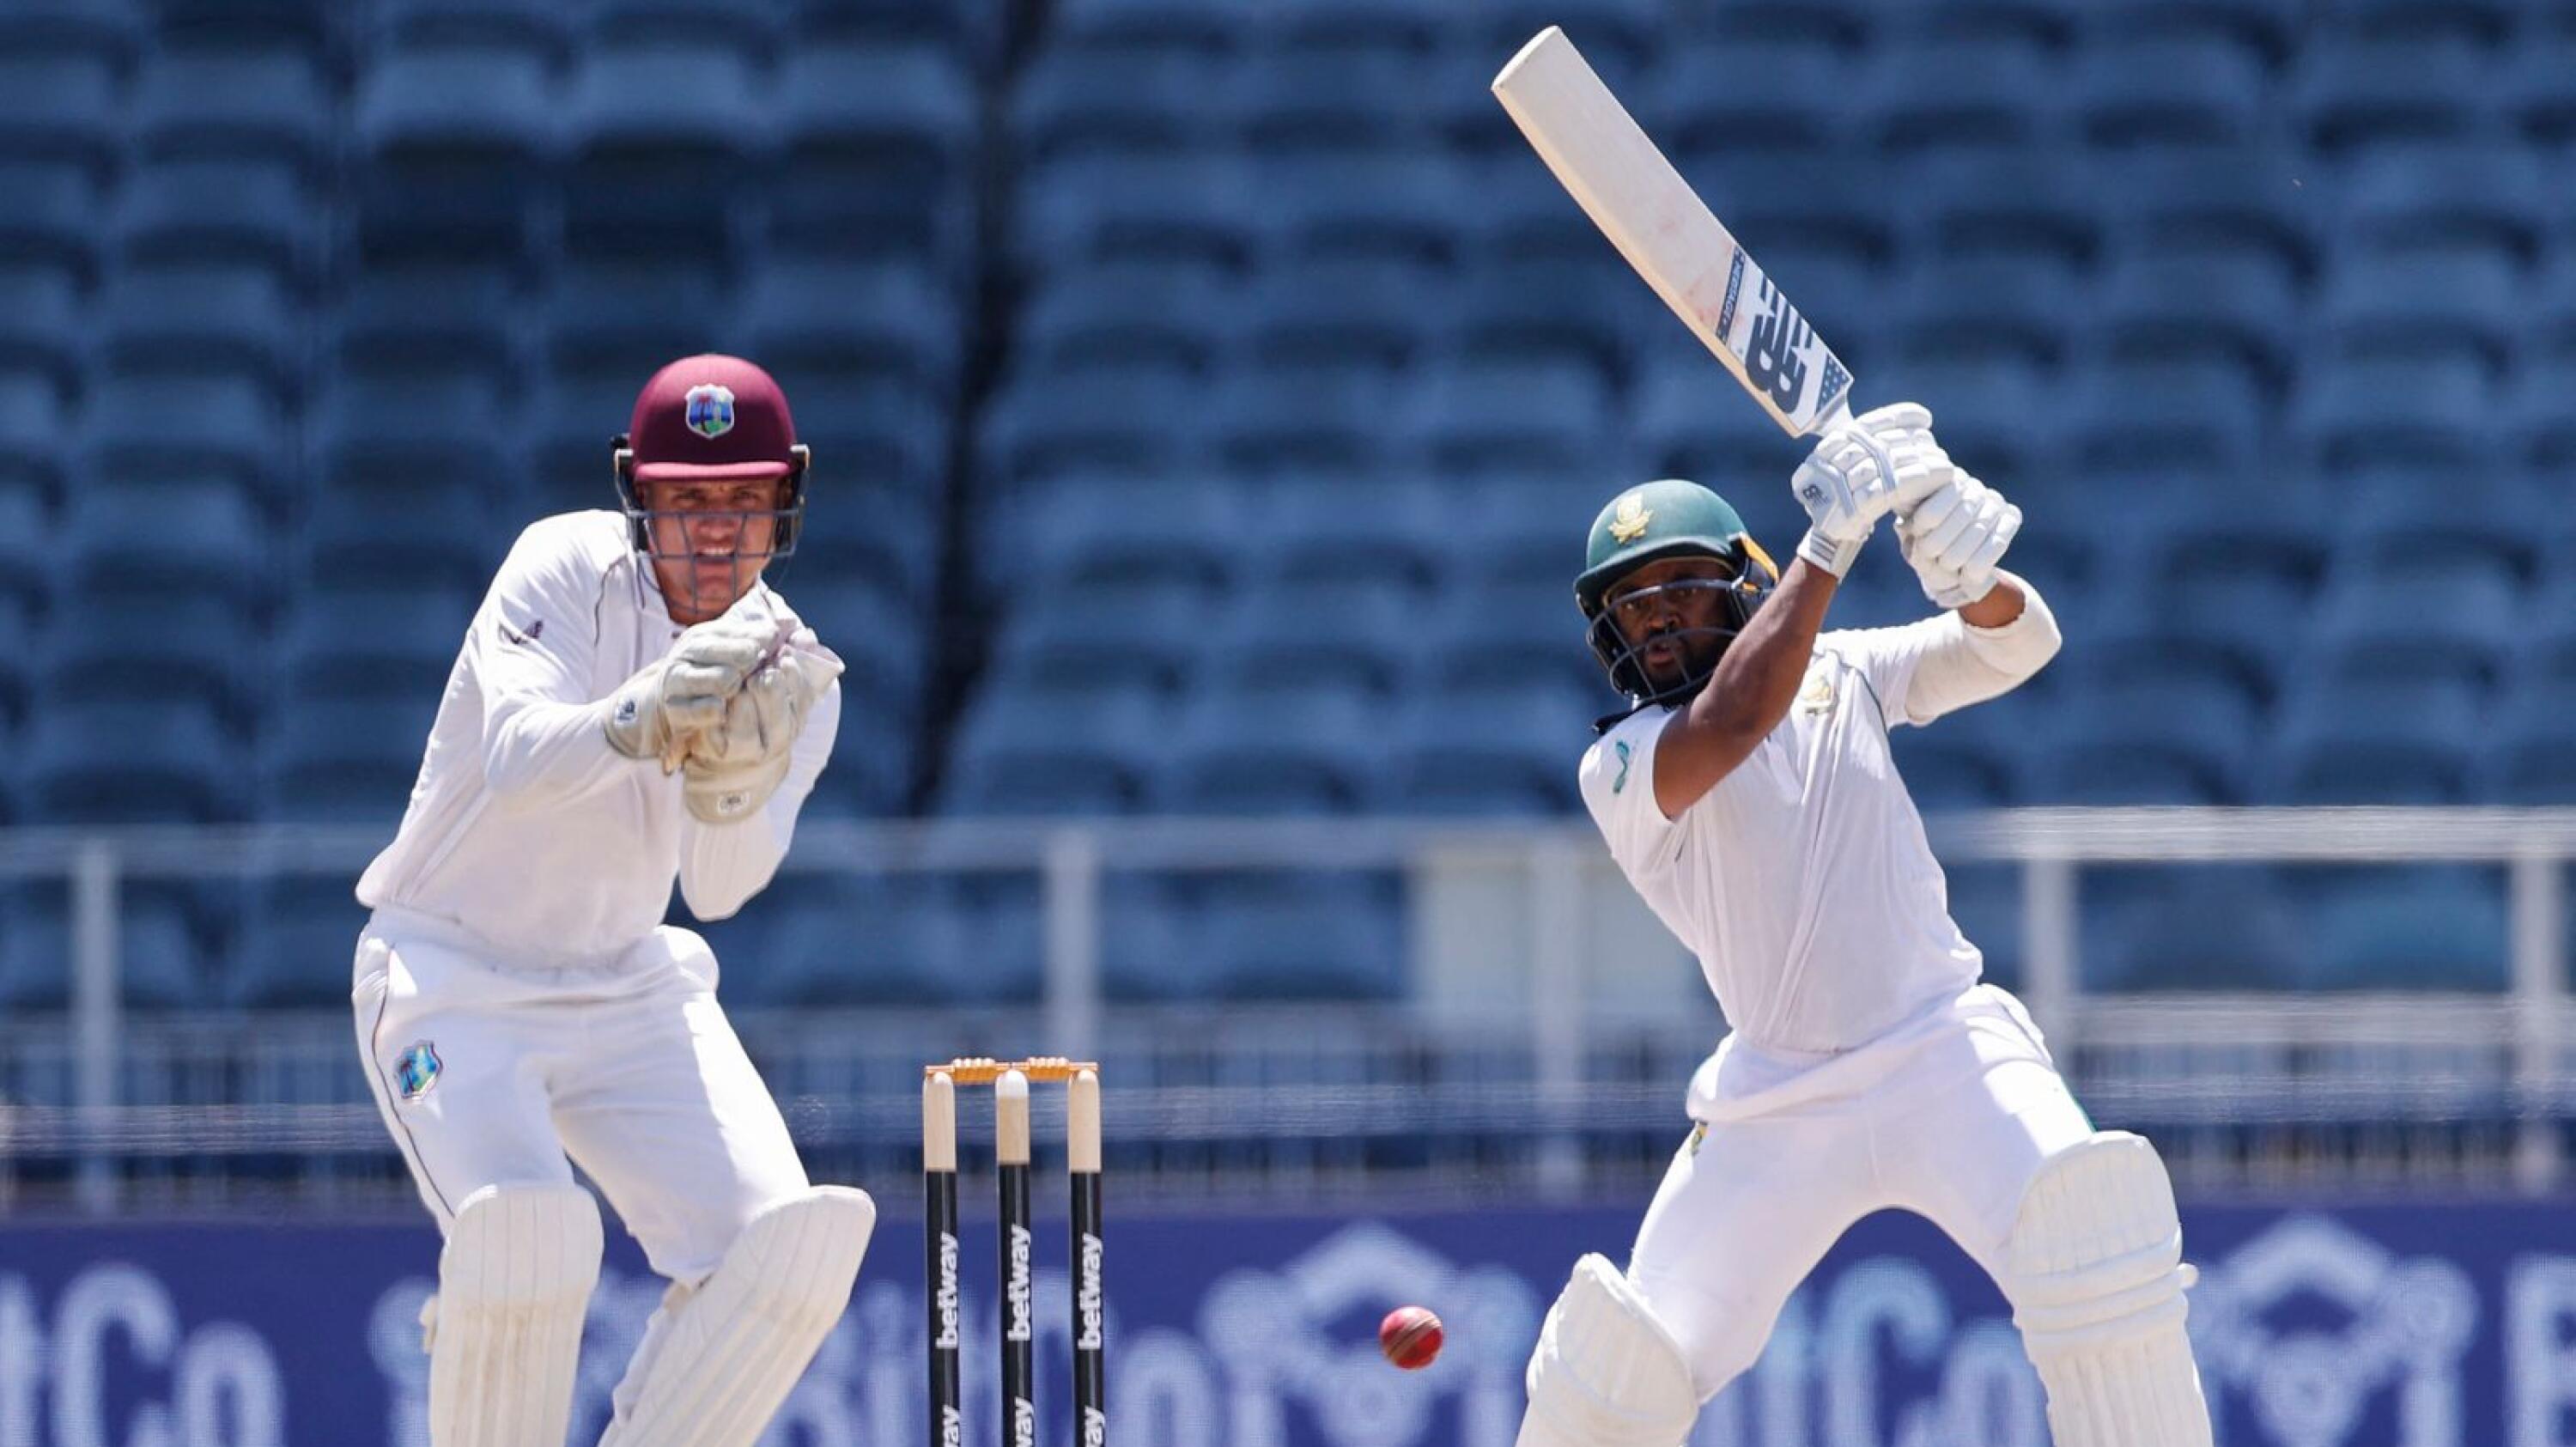 South Africa's Temba Bavuma plays a shot as West Indies wicketkeeper Joshua Da Silva looks on during the third day of the second Test at The Wanderers Stadium in Johannesburg on Friday